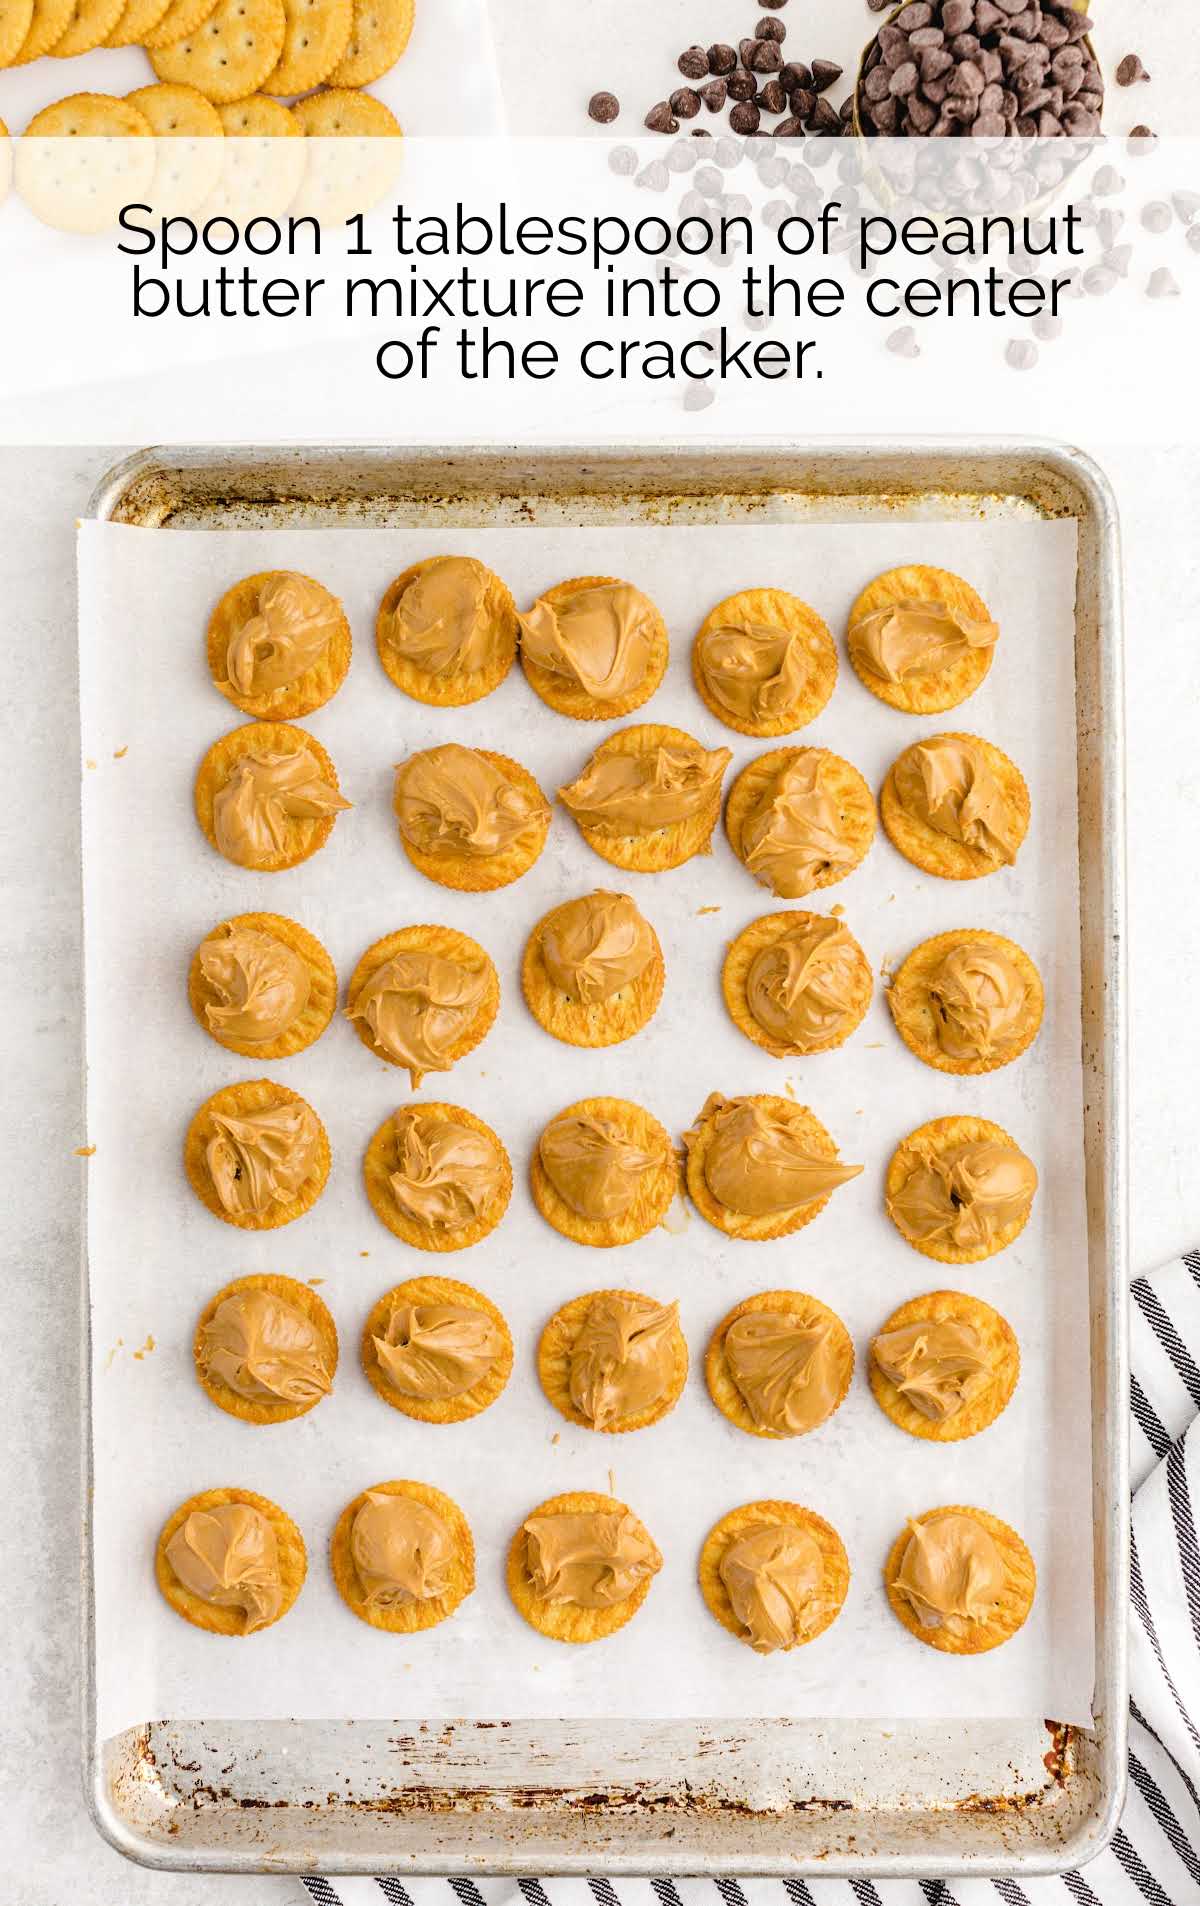 peanut butter placed on top of the cookies in a baking tray